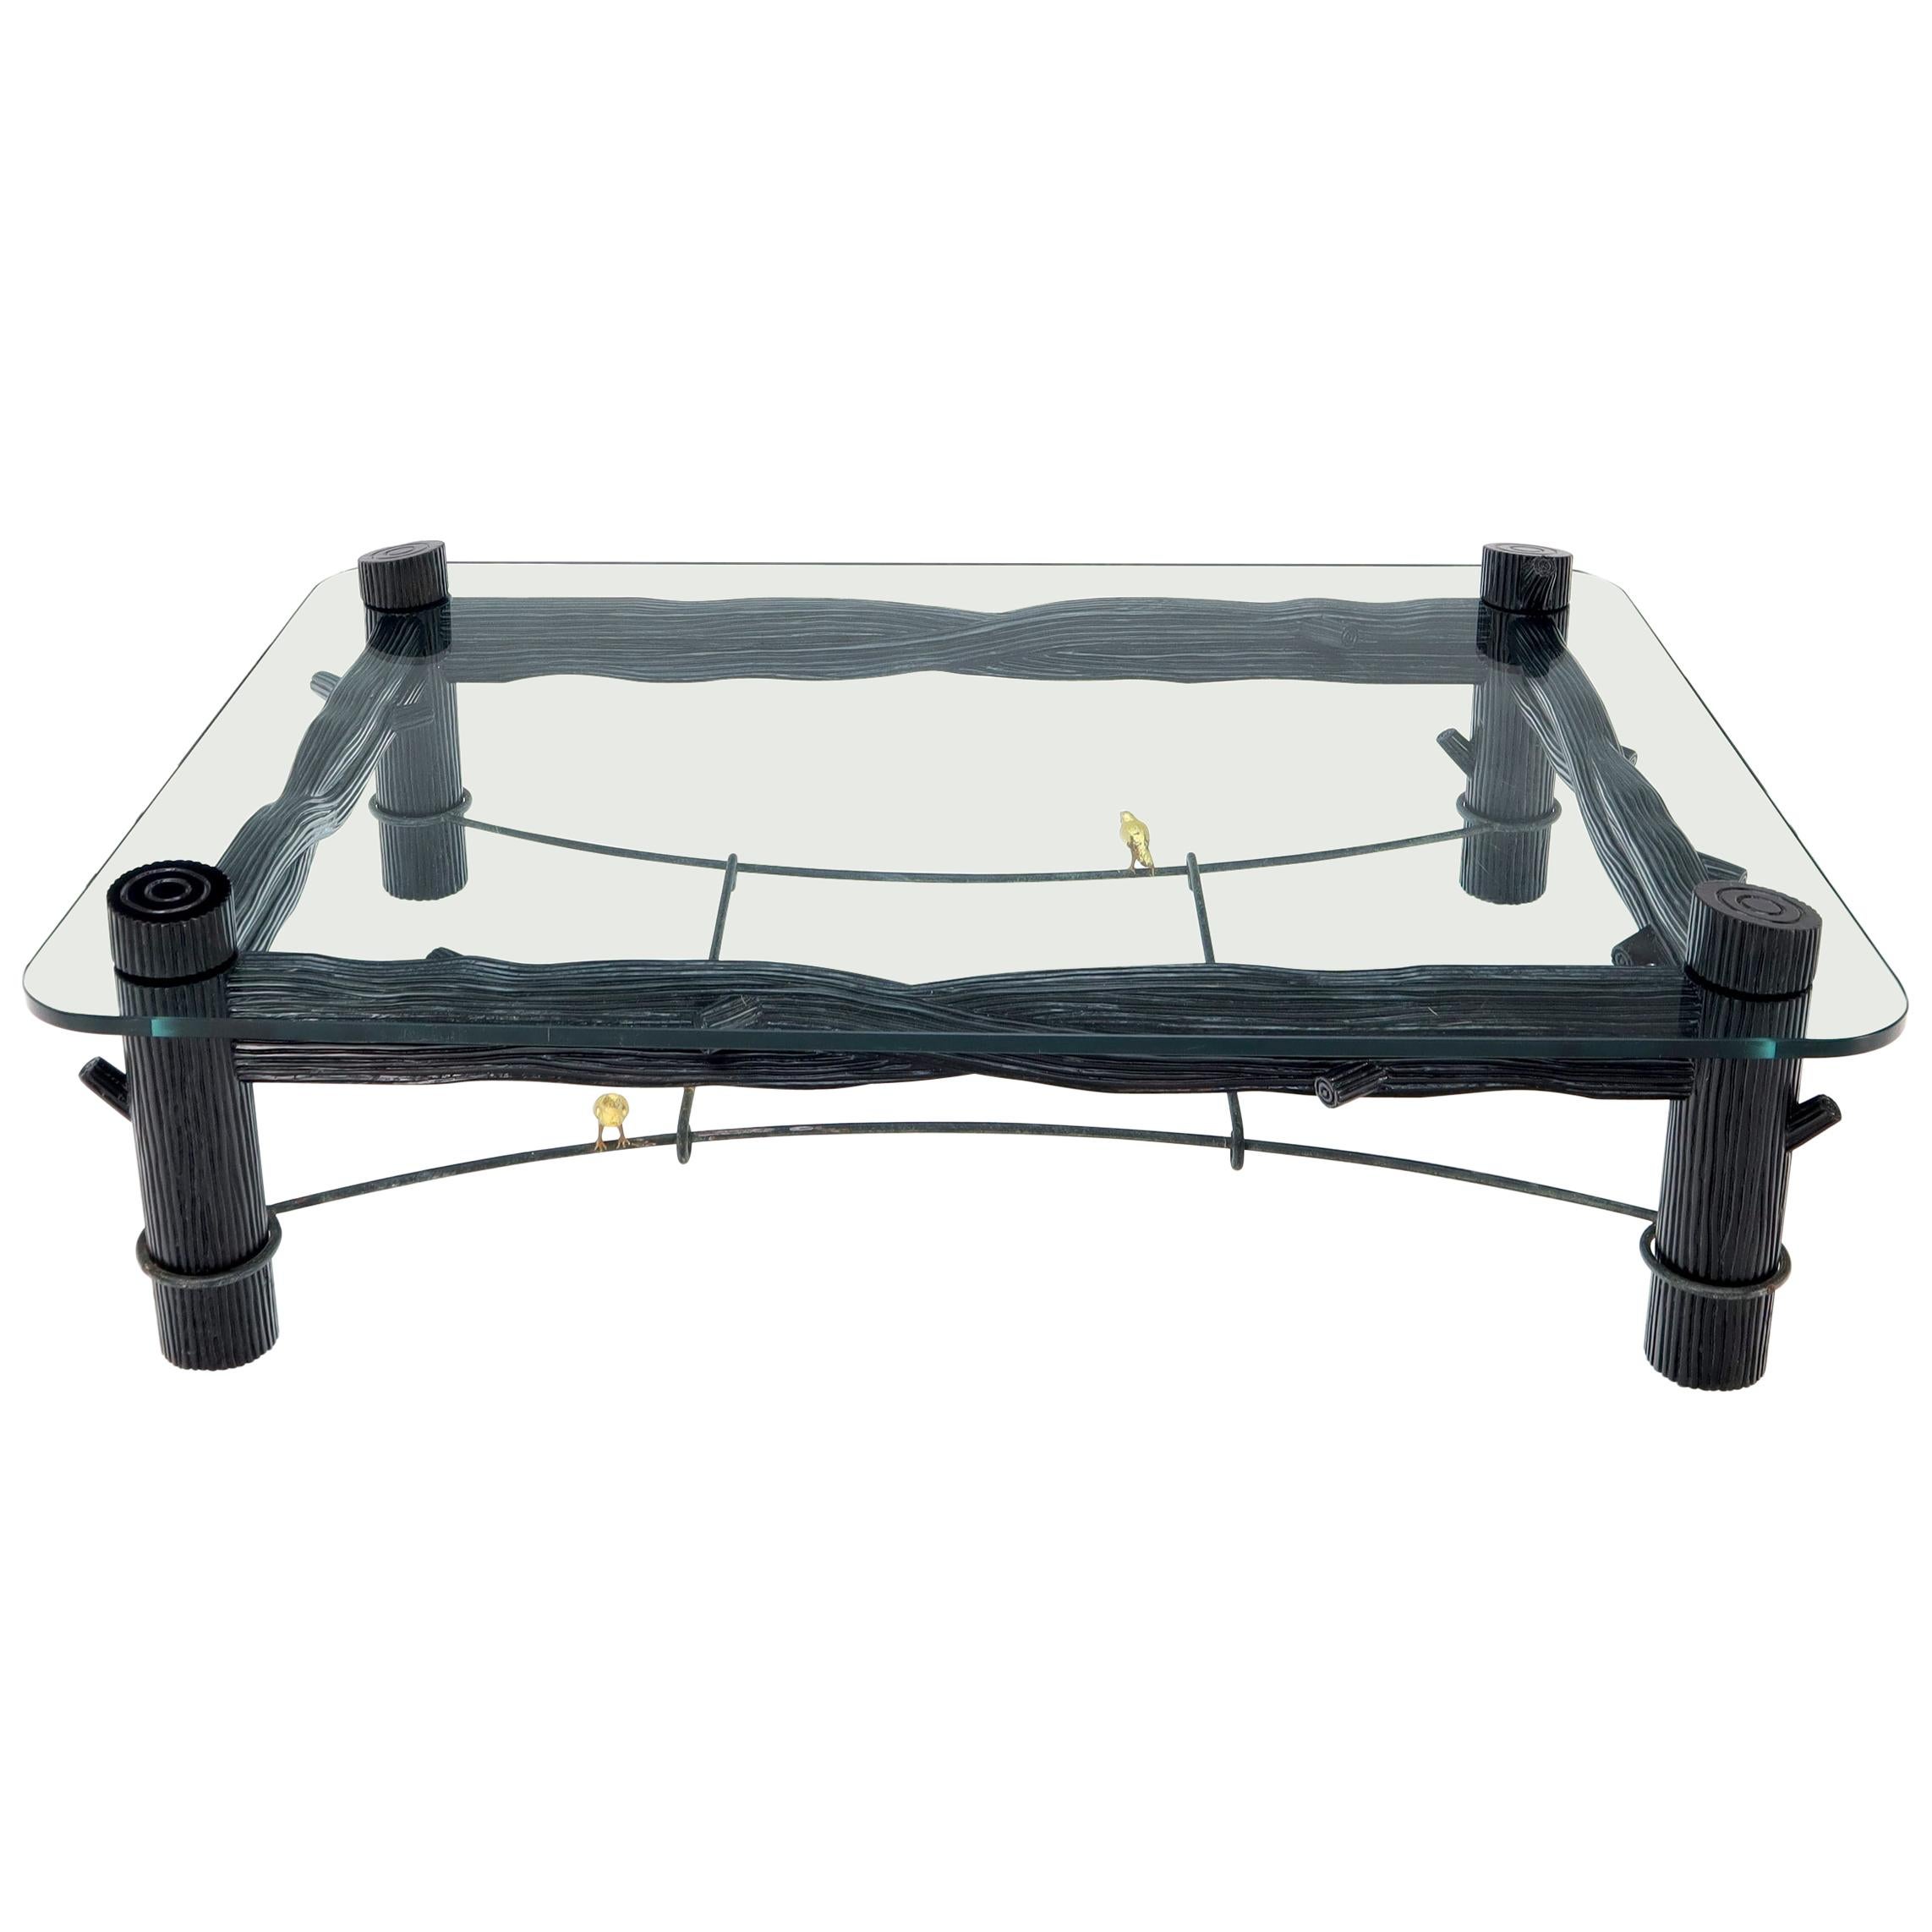 Large Oversize Thick Glass Top Rectangle Coffee Table with Singing Birds